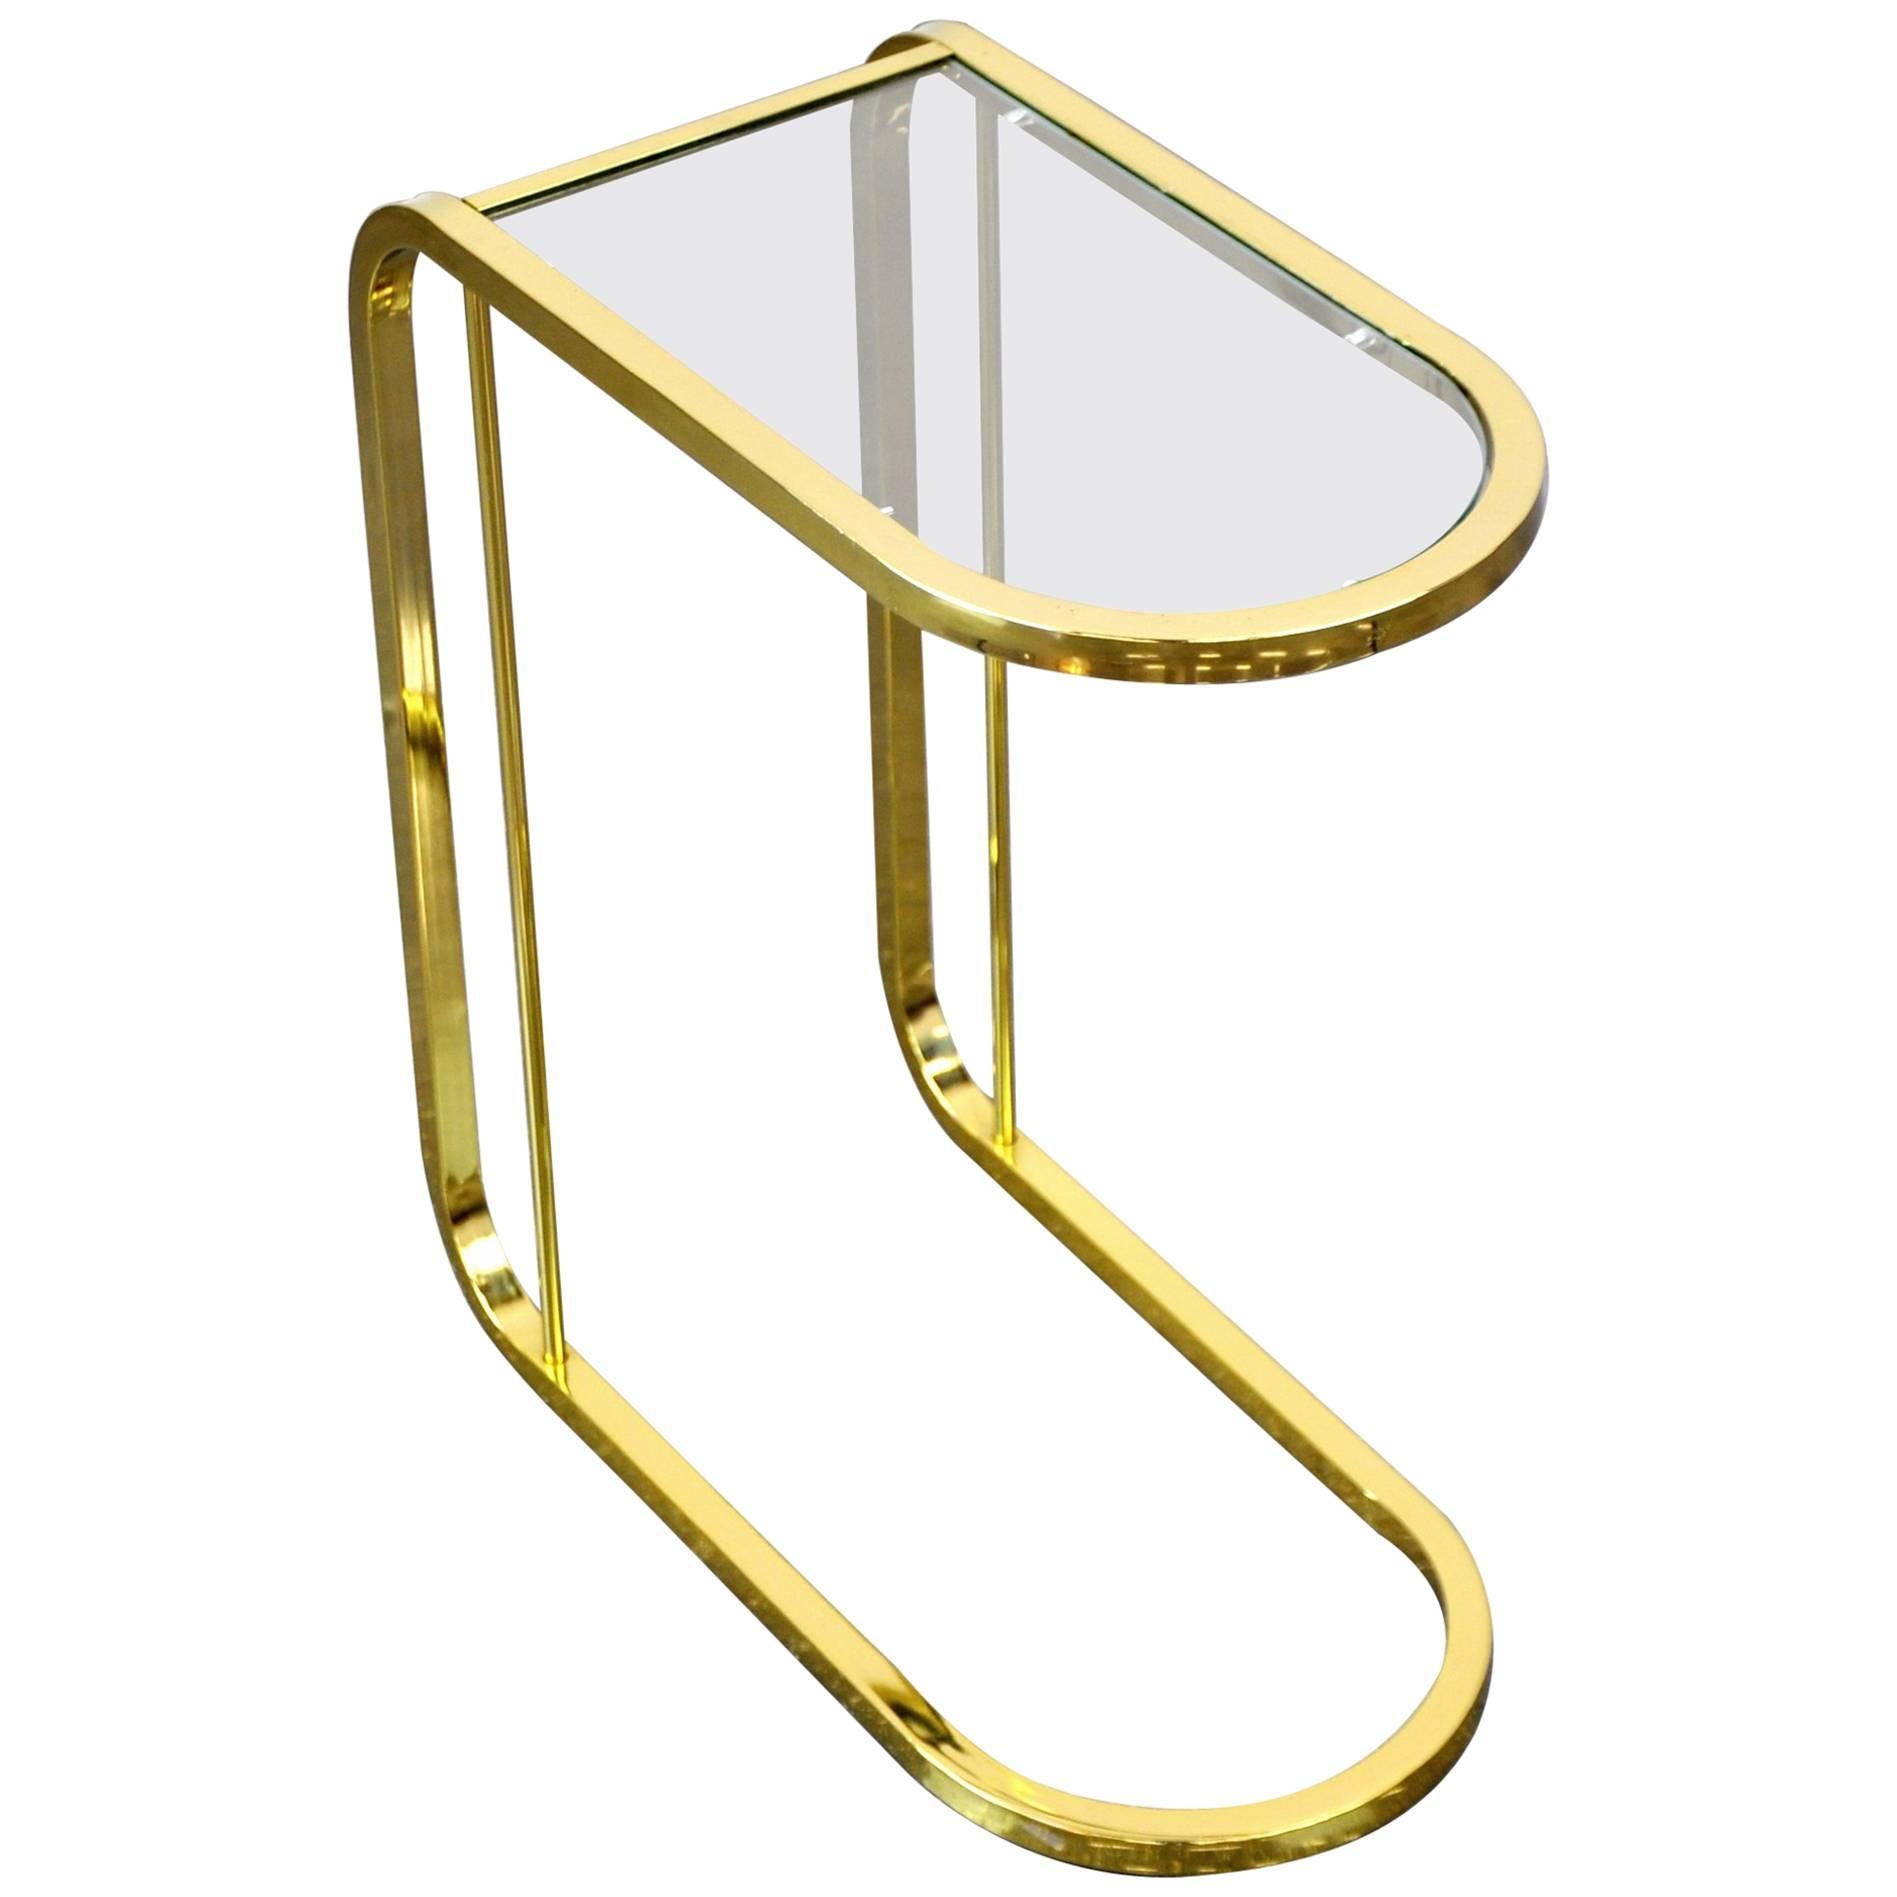 Milo Baughman Style Brass and Glass Cantilever Side Table